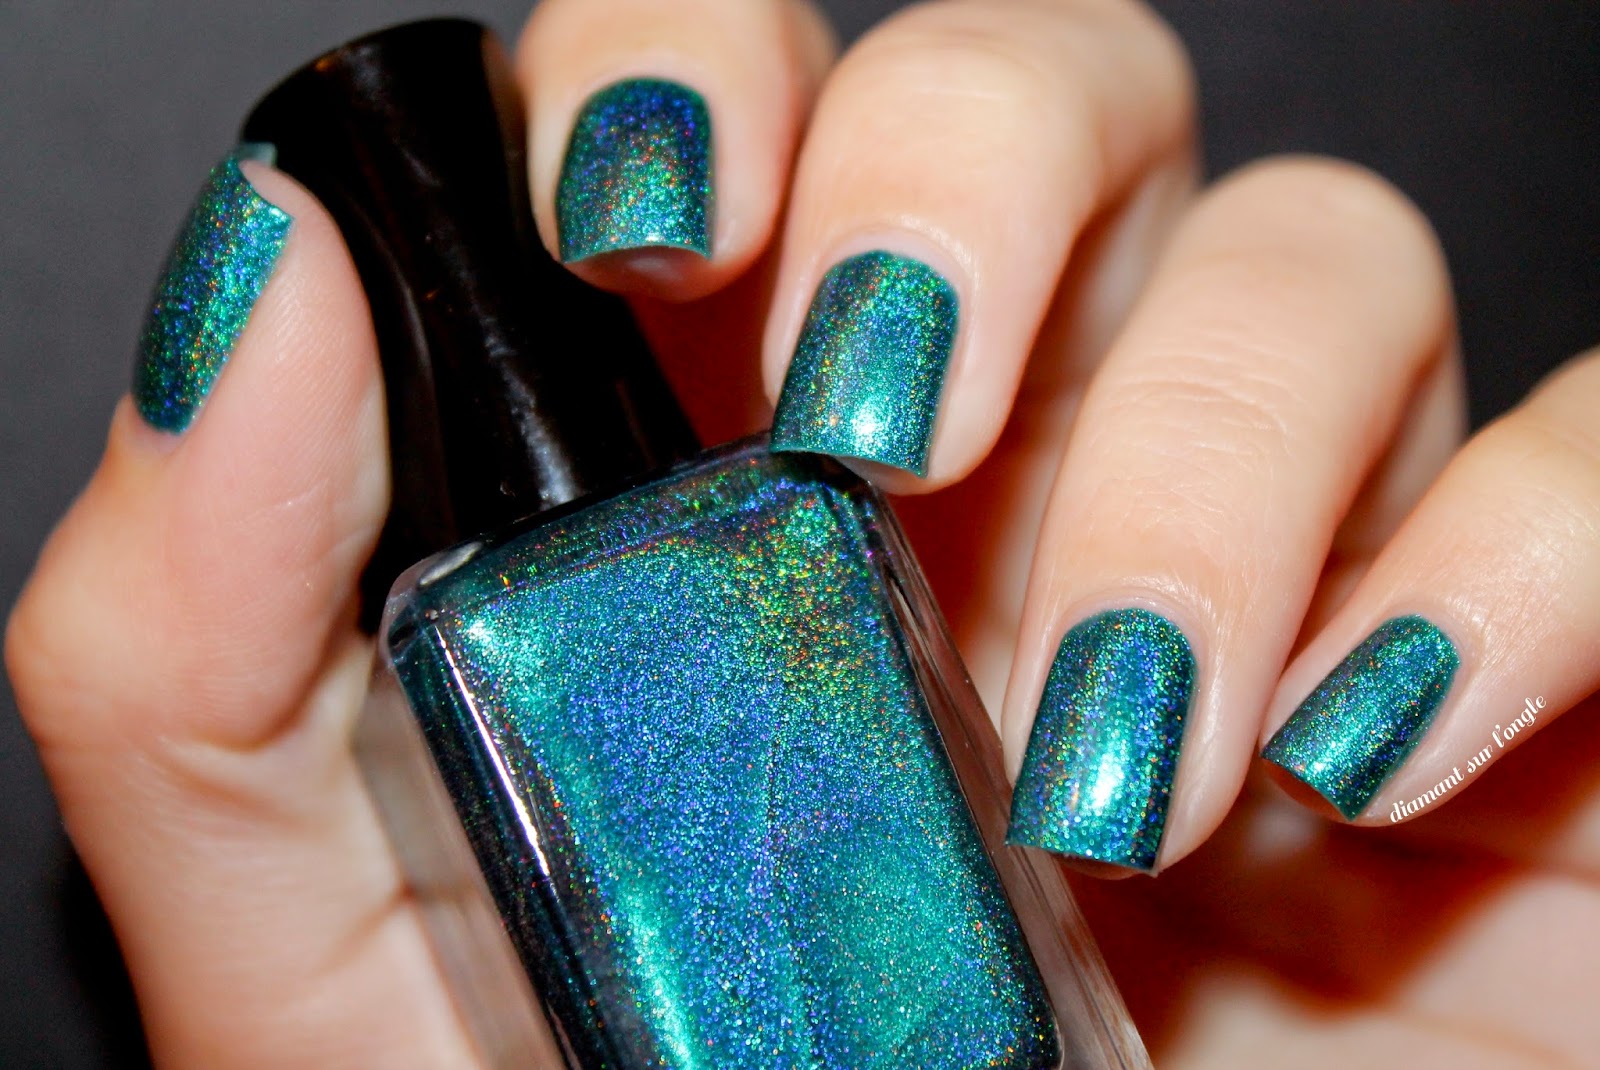 Swatch of the nail polish "Scintealliant" by Enchanted Polish ft. Pshiiit